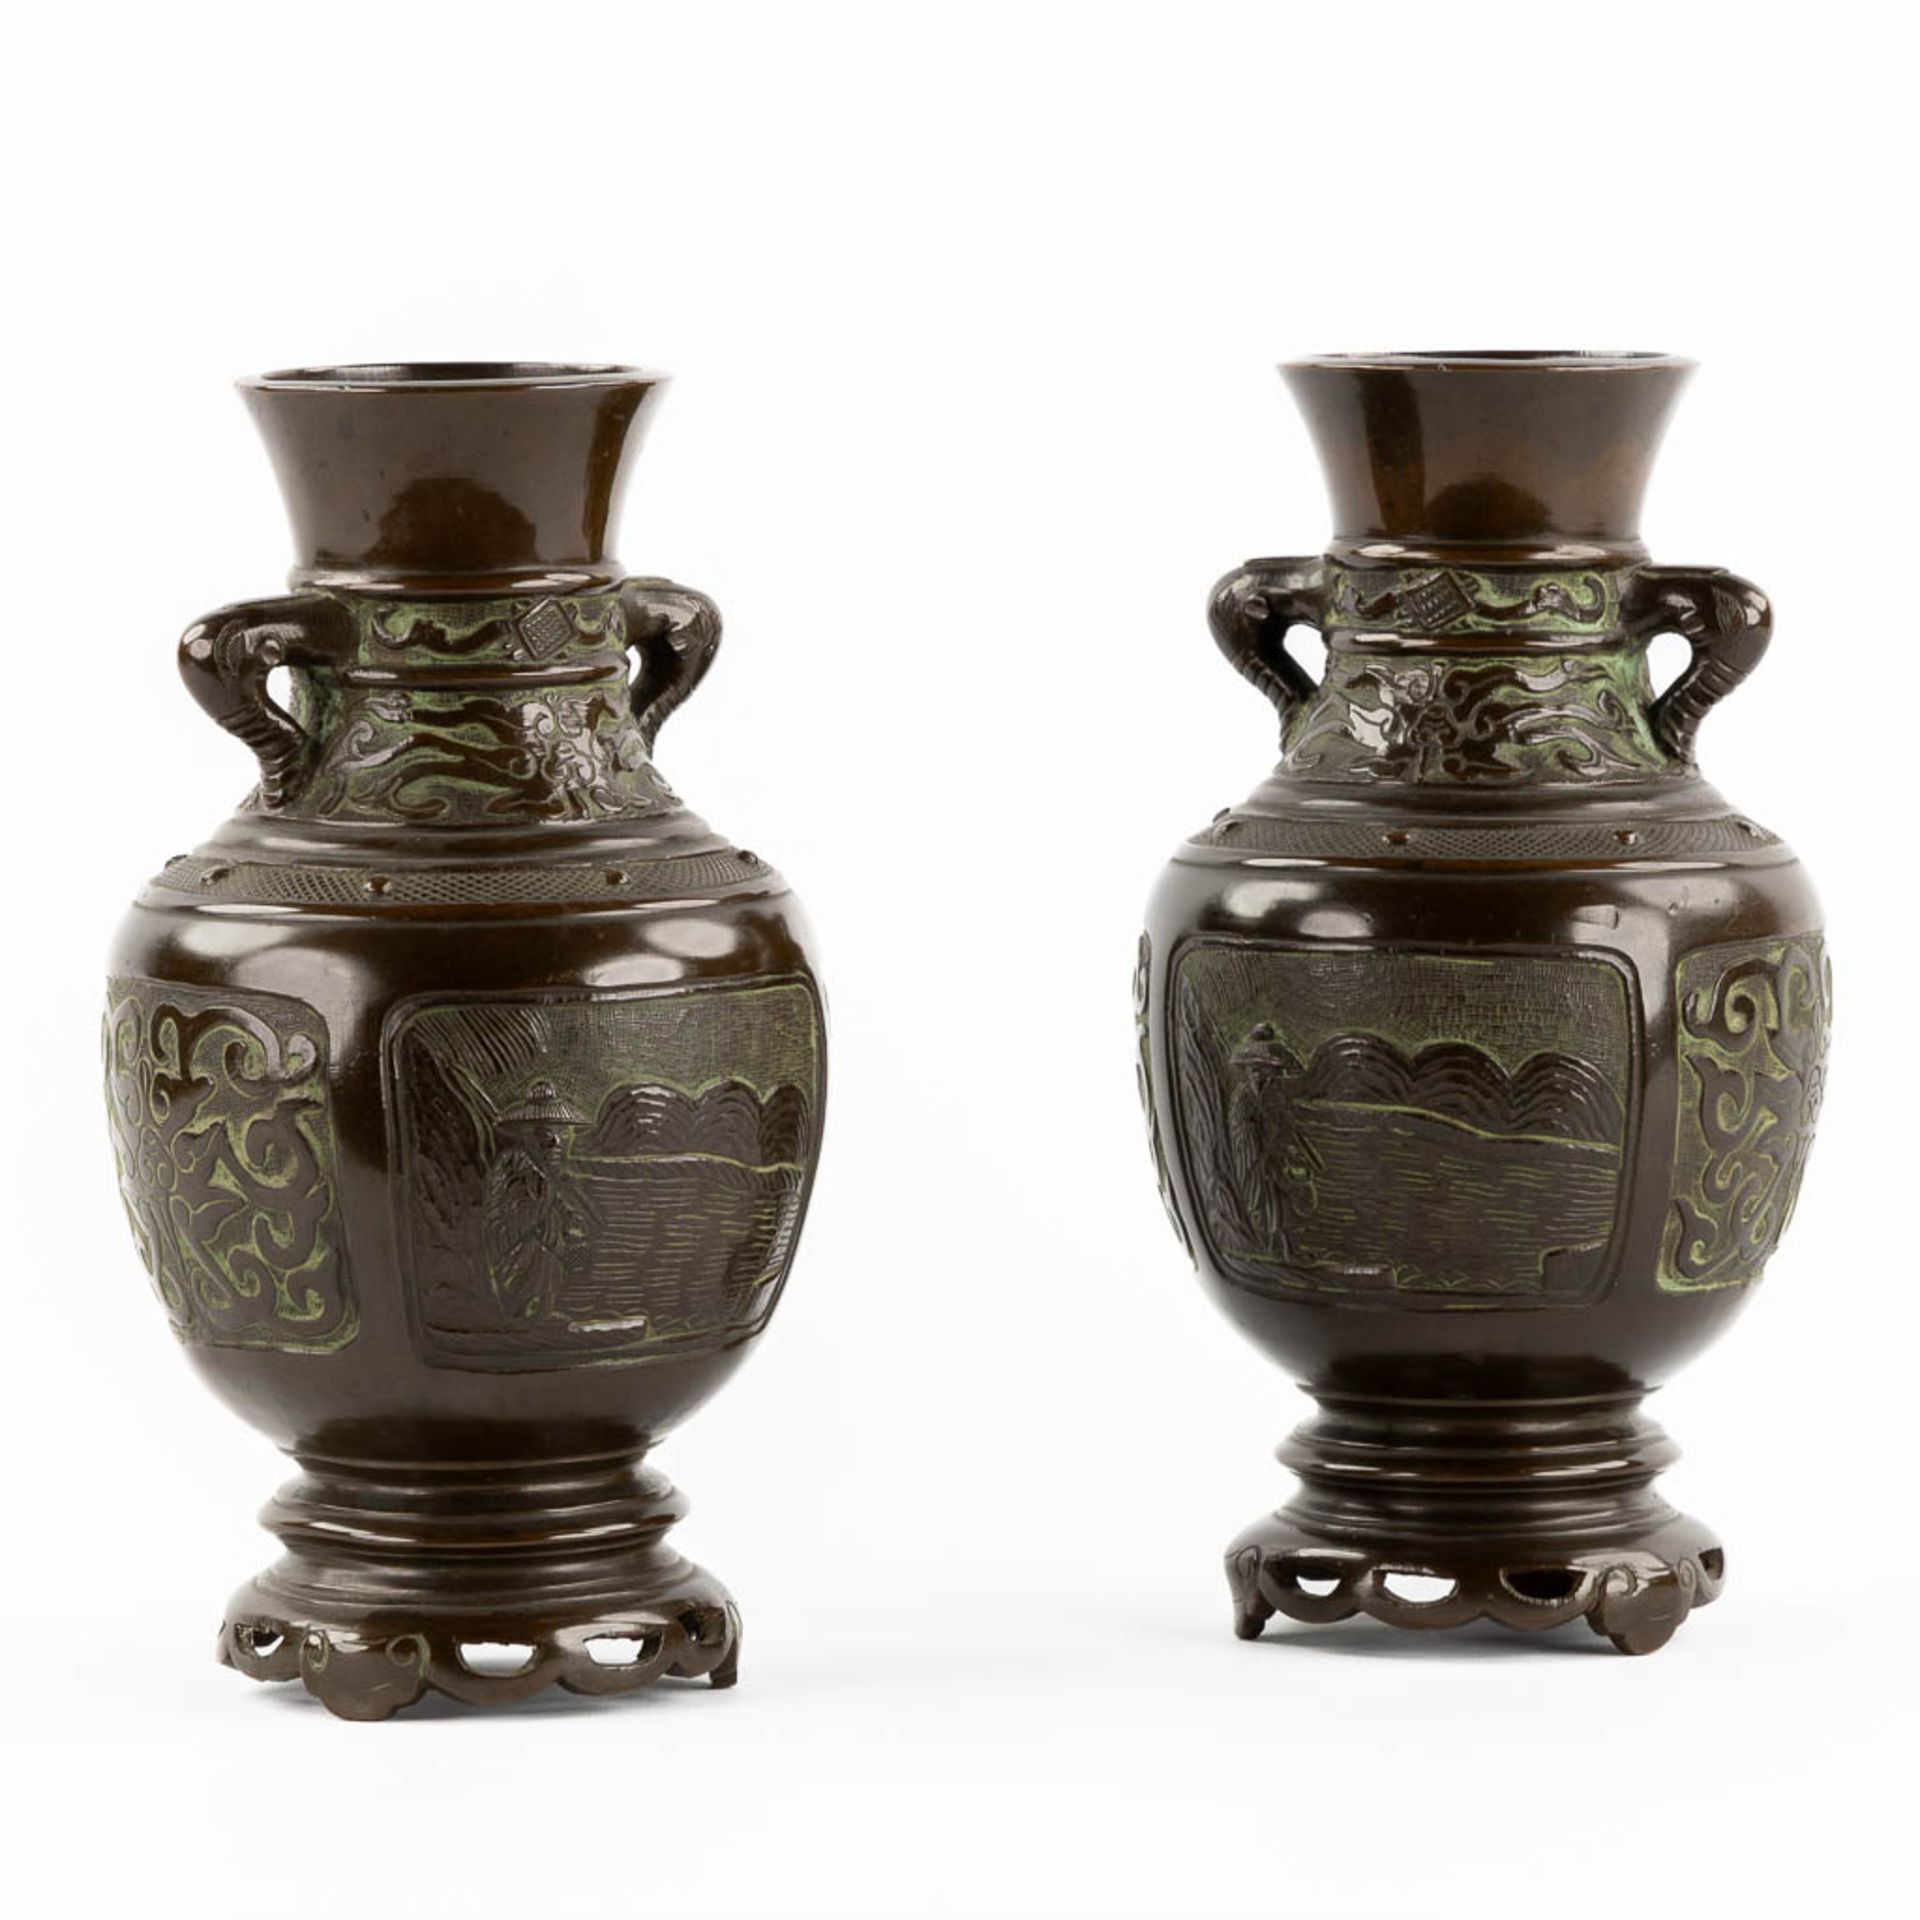 A pair of Japanese vases, patinated bronze. 19th C. (H:26 x D:14 cm)